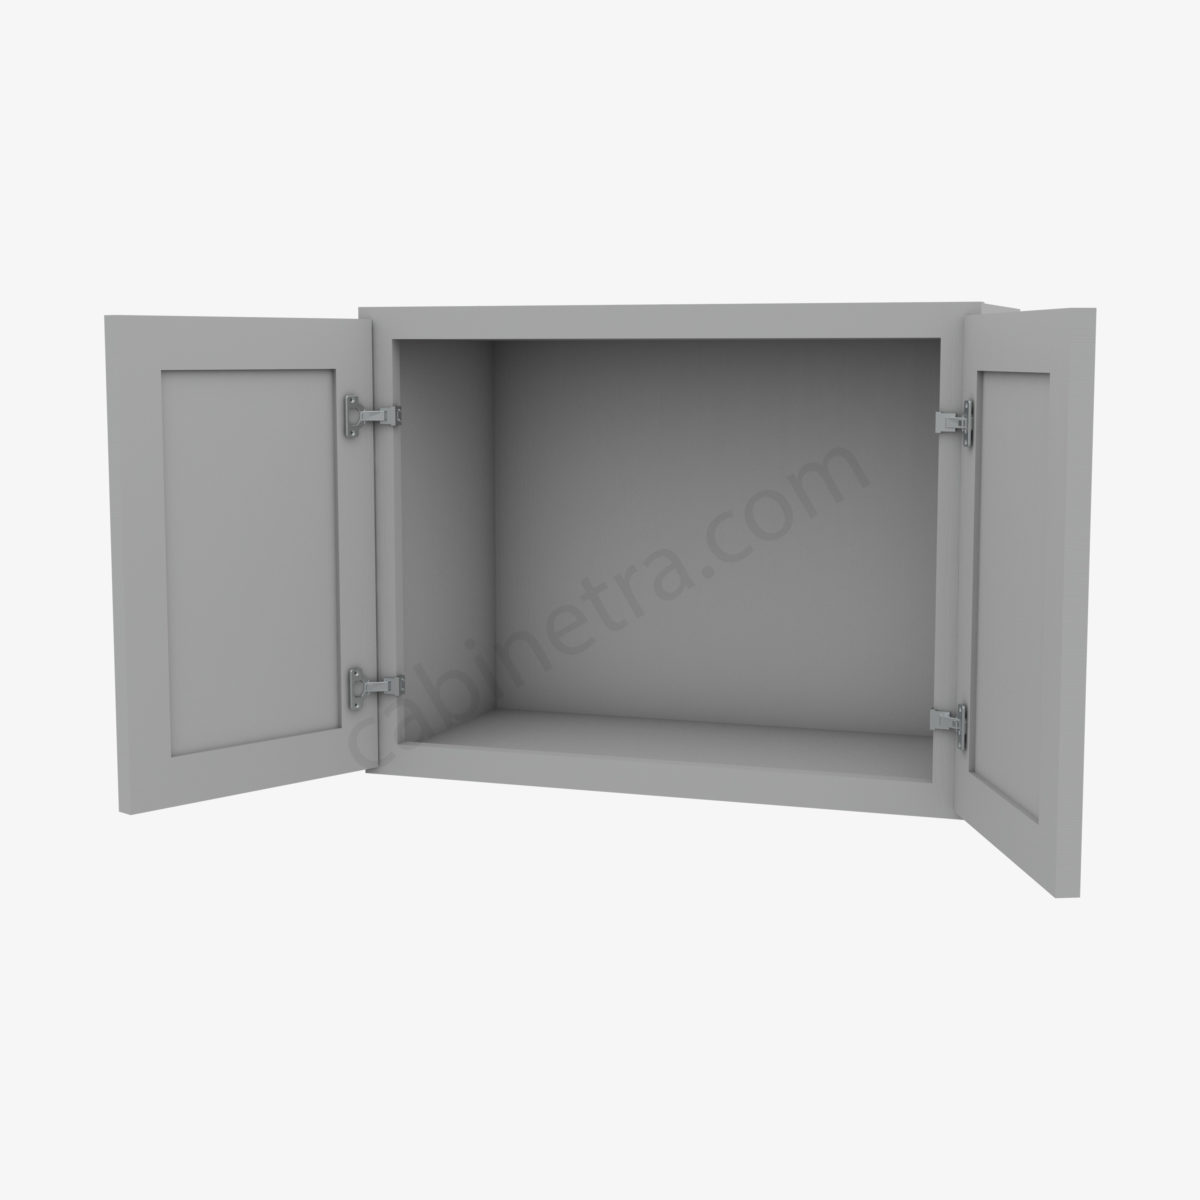 AB W2418B 5 Forevermark Lait Gray Shaker Cabinetra scaled